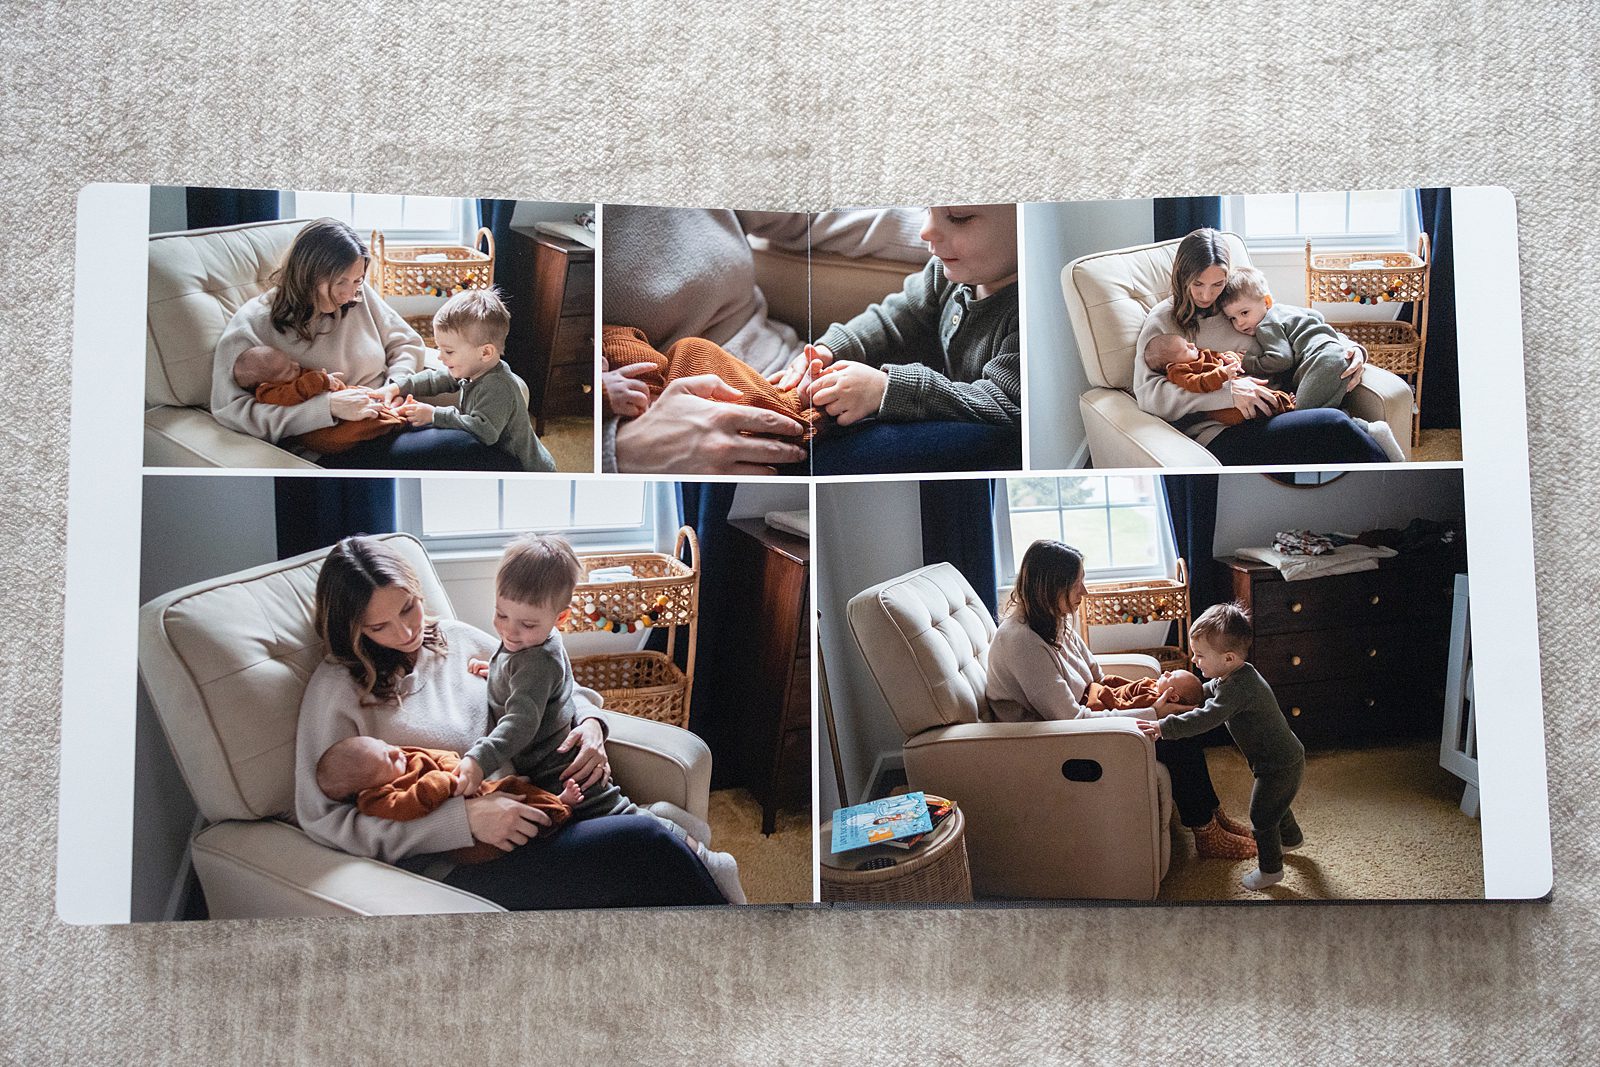 image of the pages inside a photo album